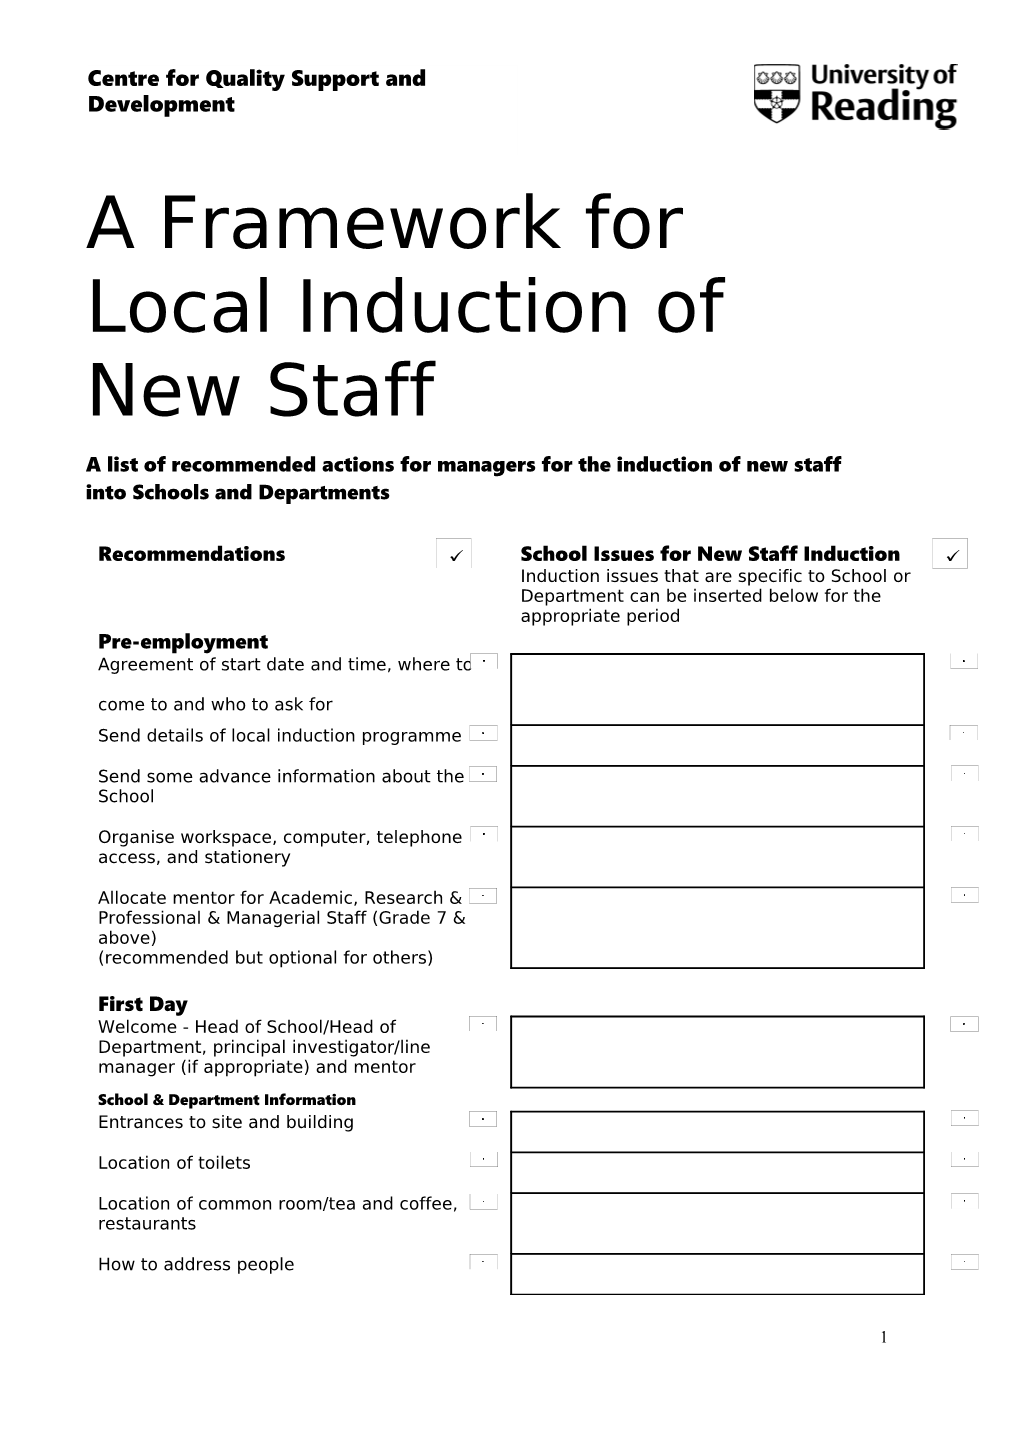 A Framework for Local Induction of New Staff This Is a List of Recommended Actions For